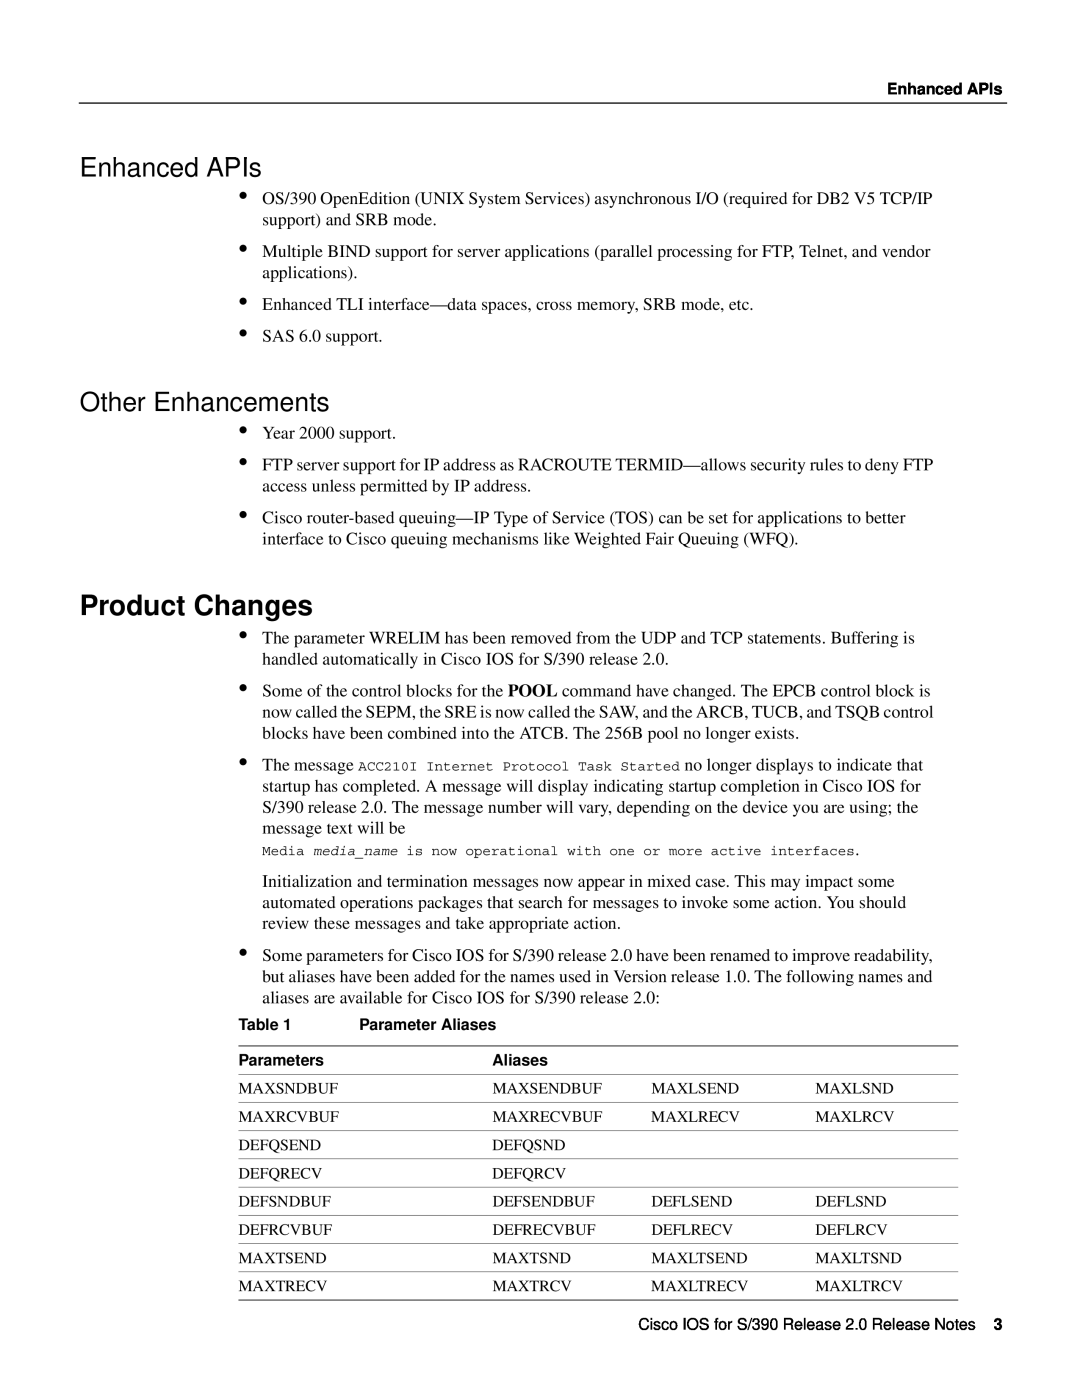 Cisco Systems S/390 manual Product Changes, Enhanced APIs, Other Enhancements 